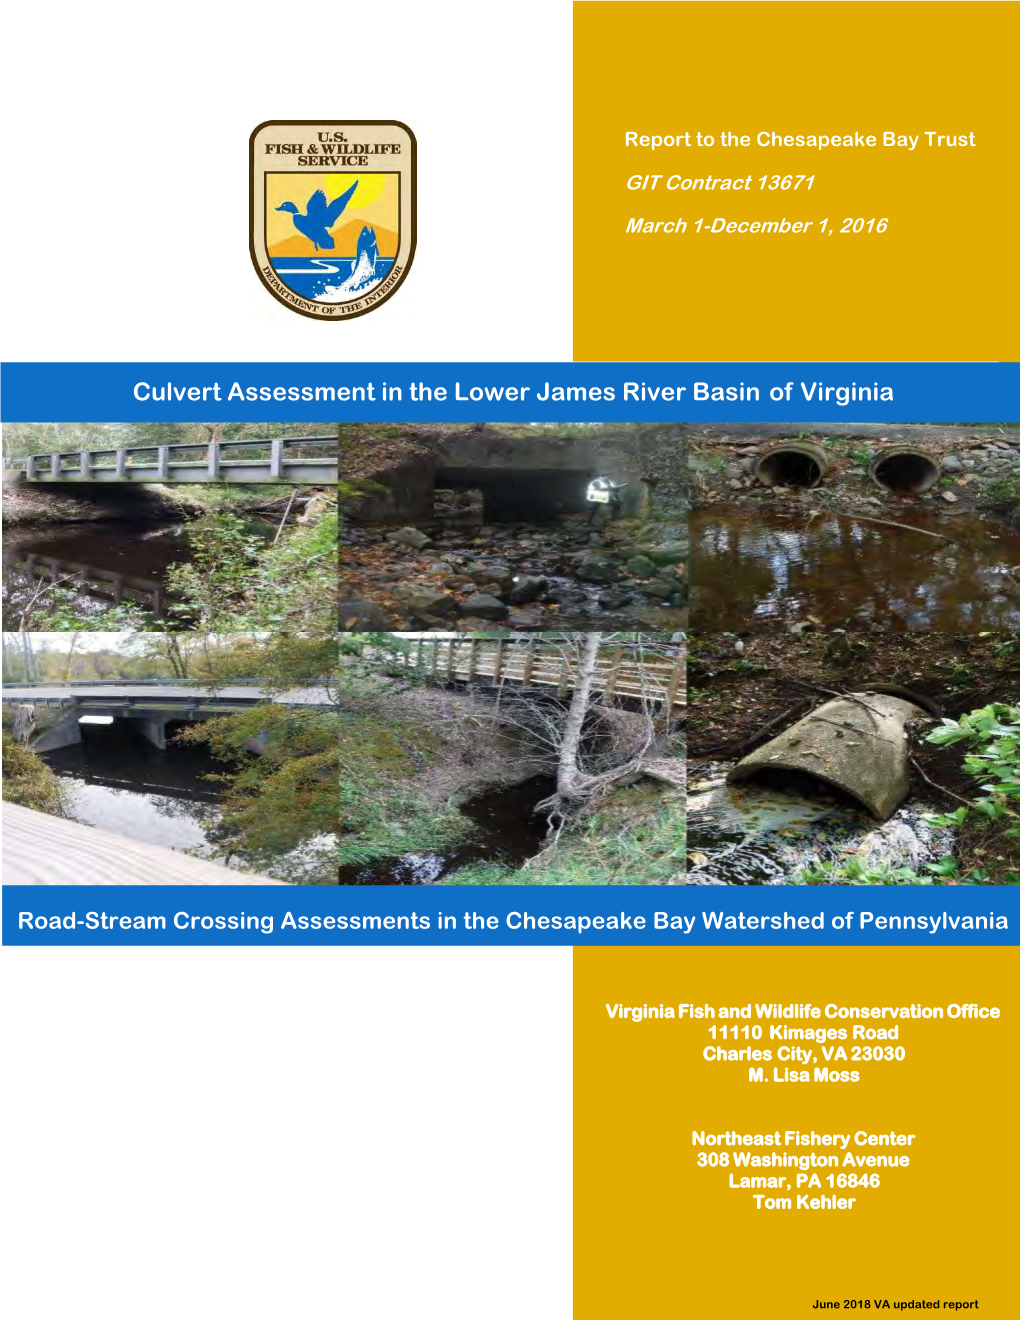 Culvert Assessment in the Lower James River Basin of Virginia